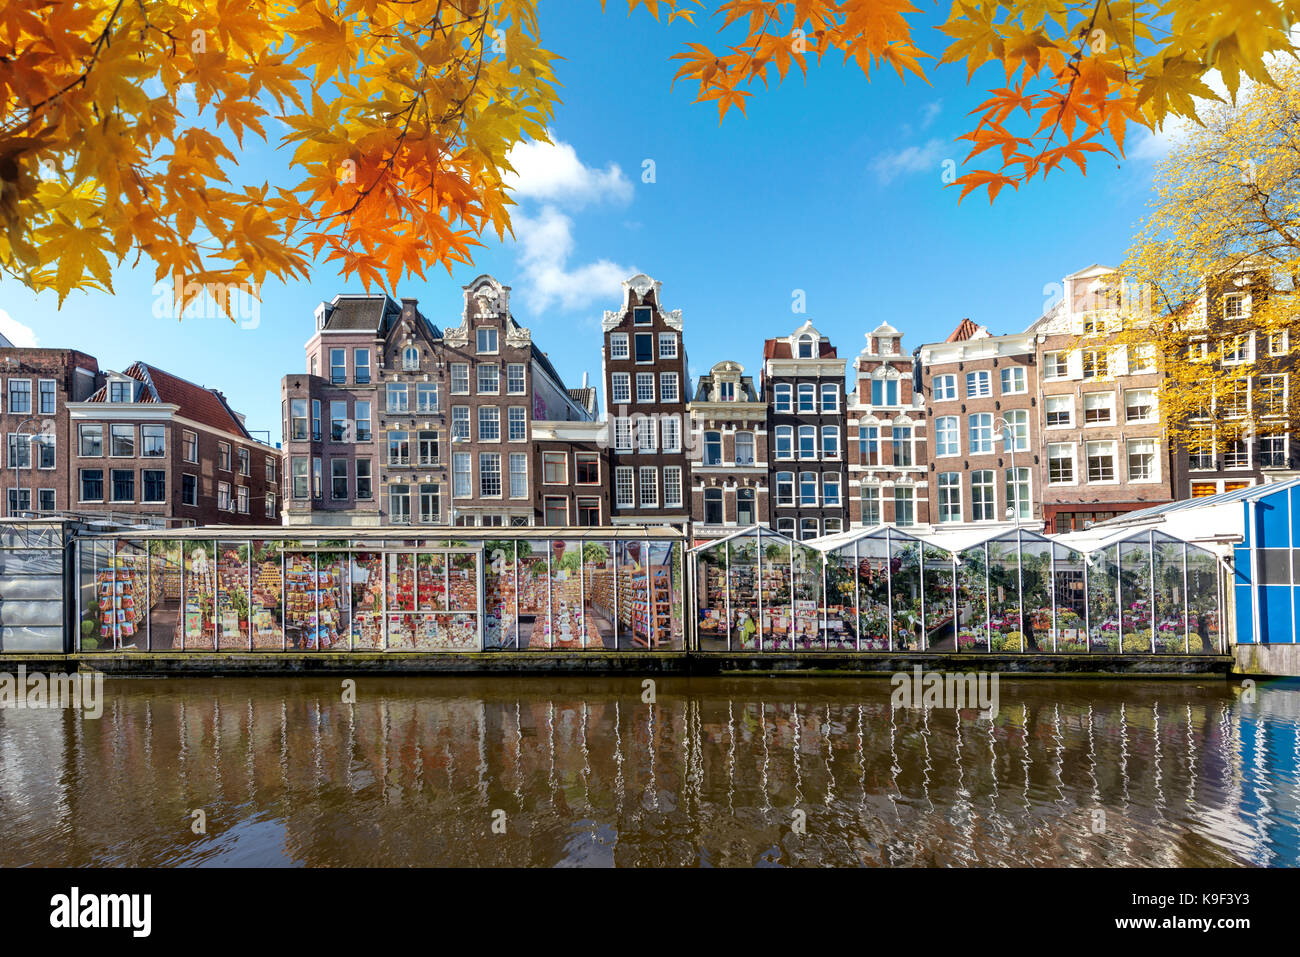 Autumn season at Amsterdam street traditional ancient dutch colorful buildings and flower market on Single canal in Amsterdam, Netherlands. Stock Photo